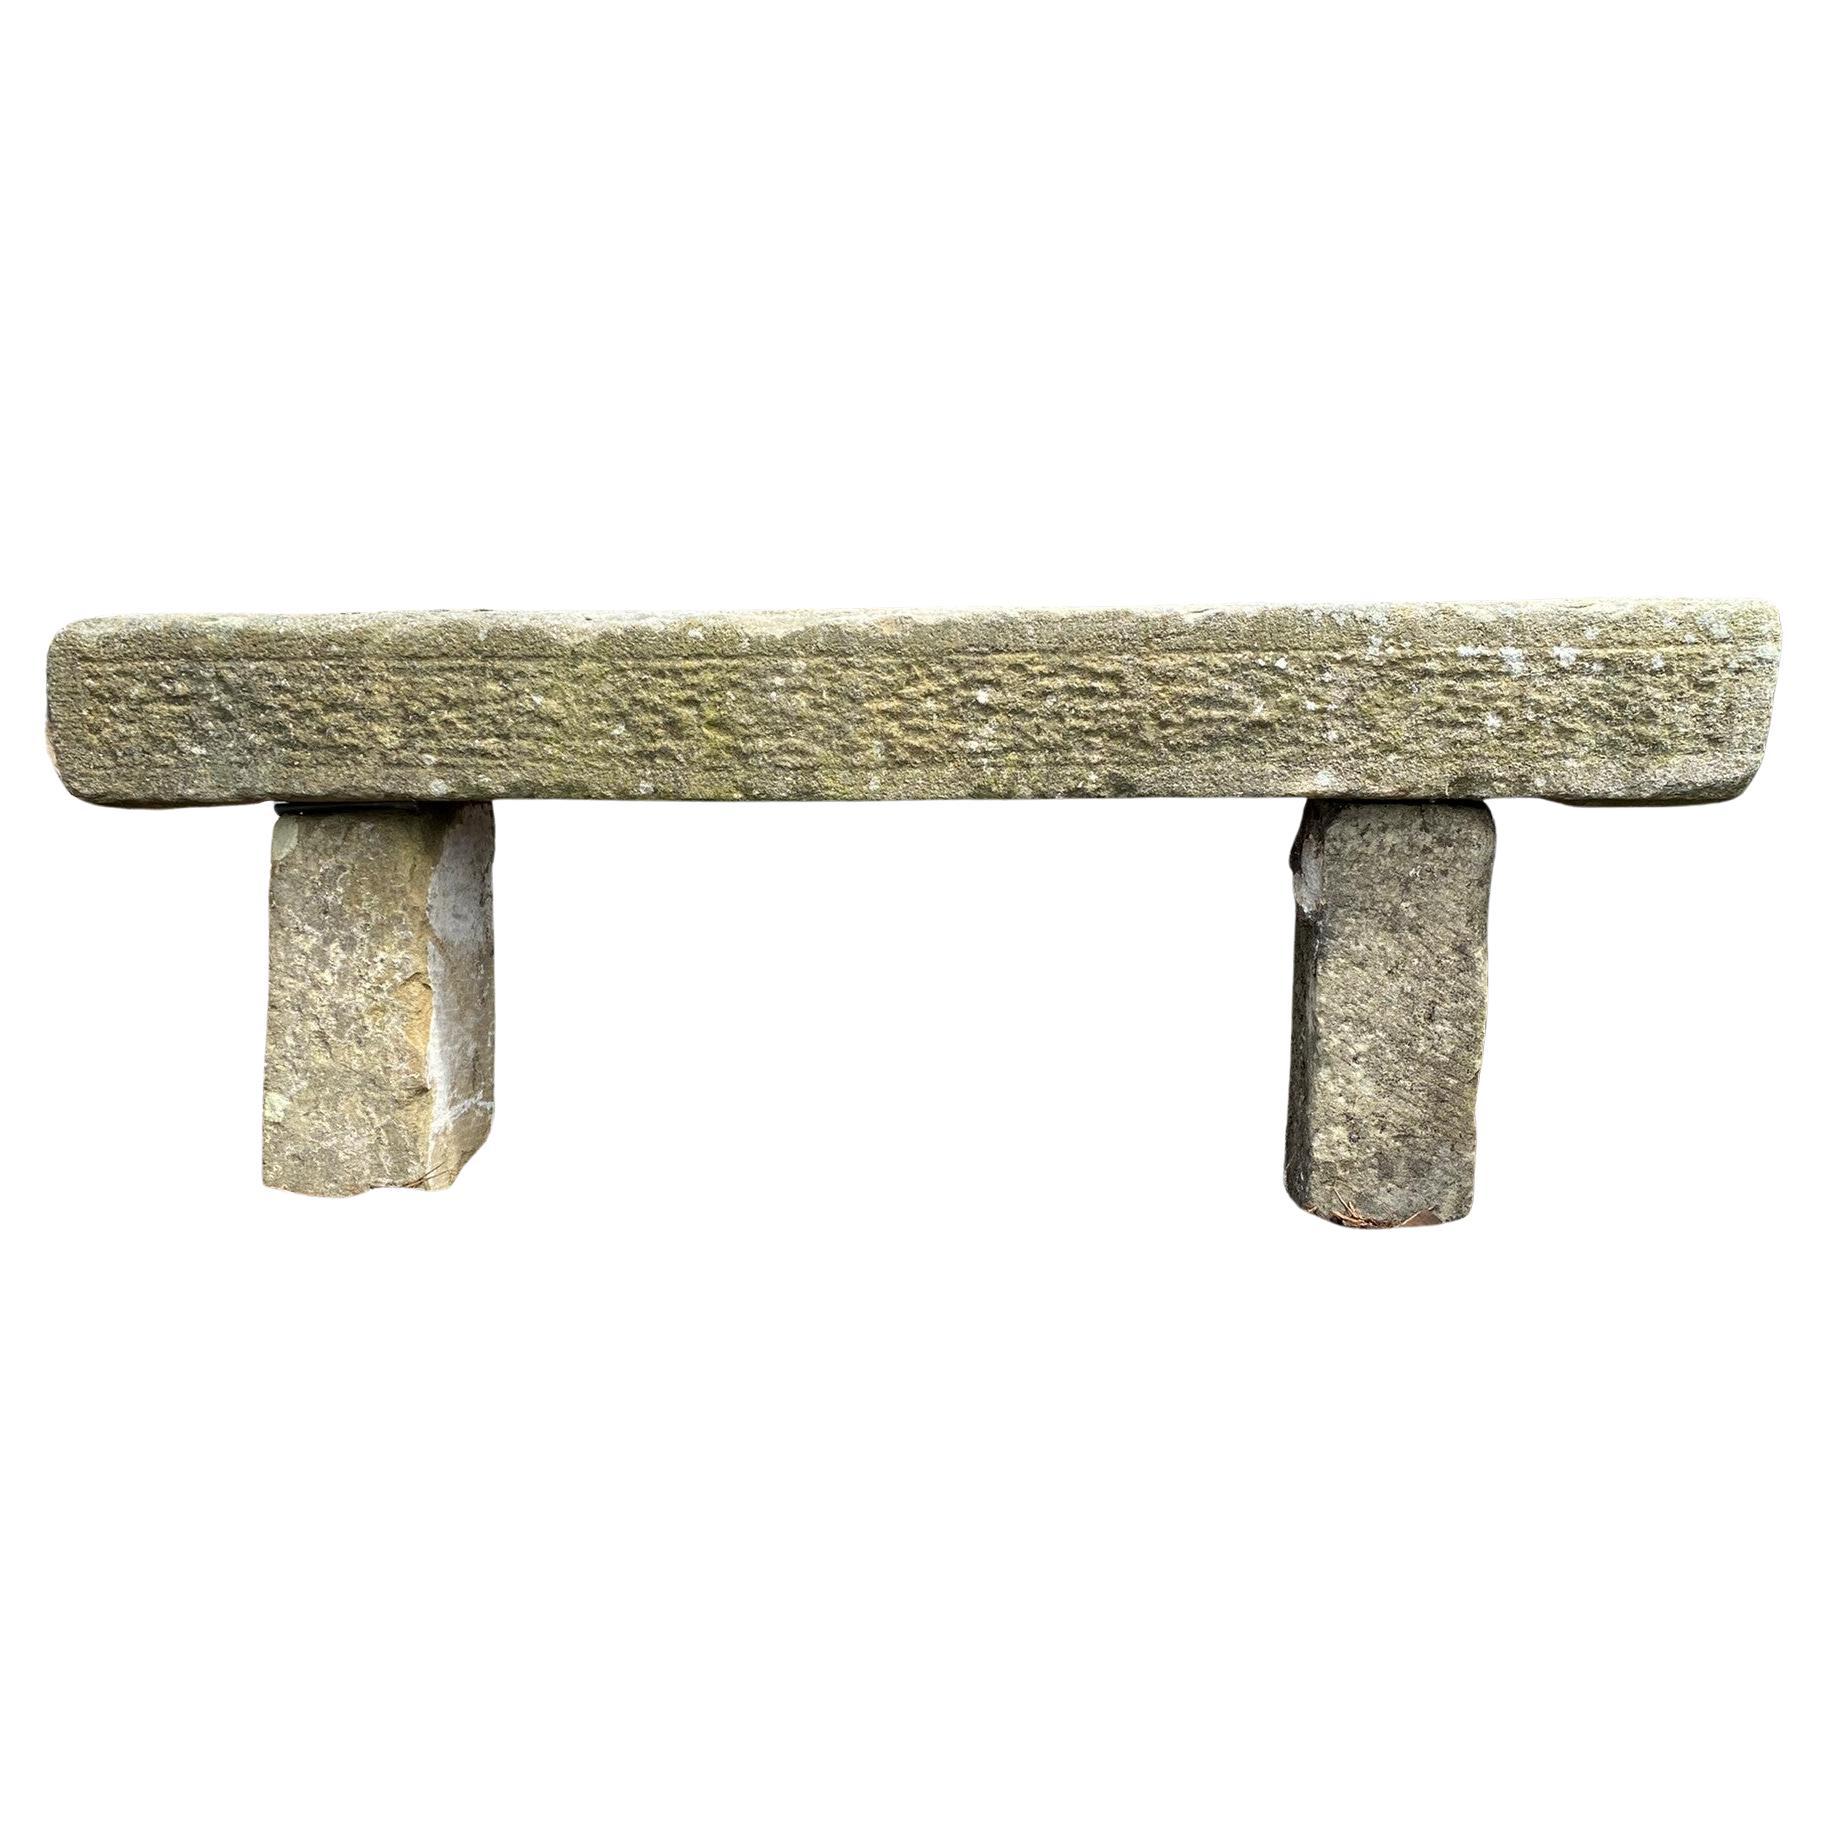 English Carved Stone Sandstone Garden Bench Seat Weathered Garden Feature 1860 For Sale